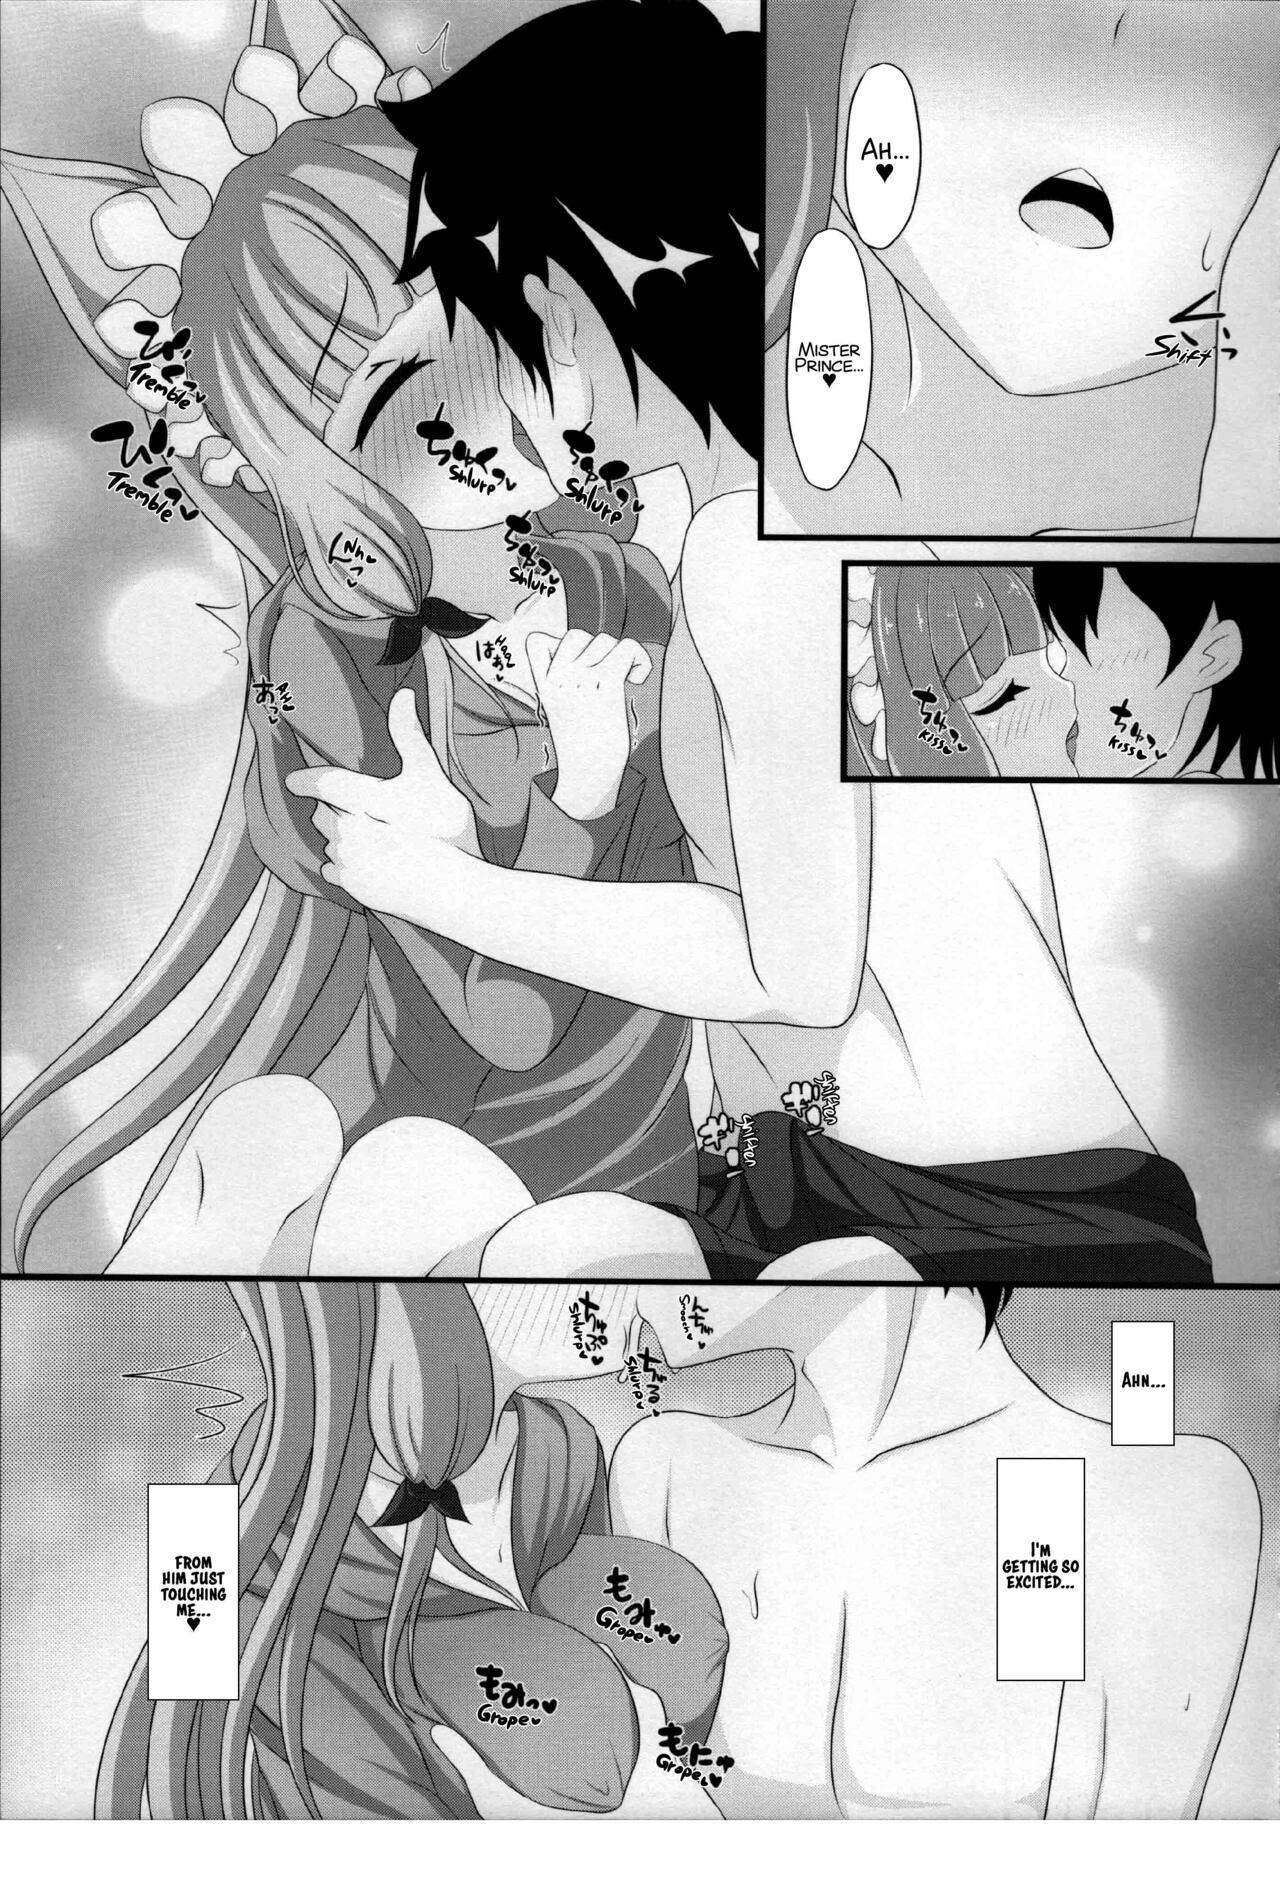 Monster Cock Maho Hime Connect! 2 - Princess connect Buttfucking - Page 8